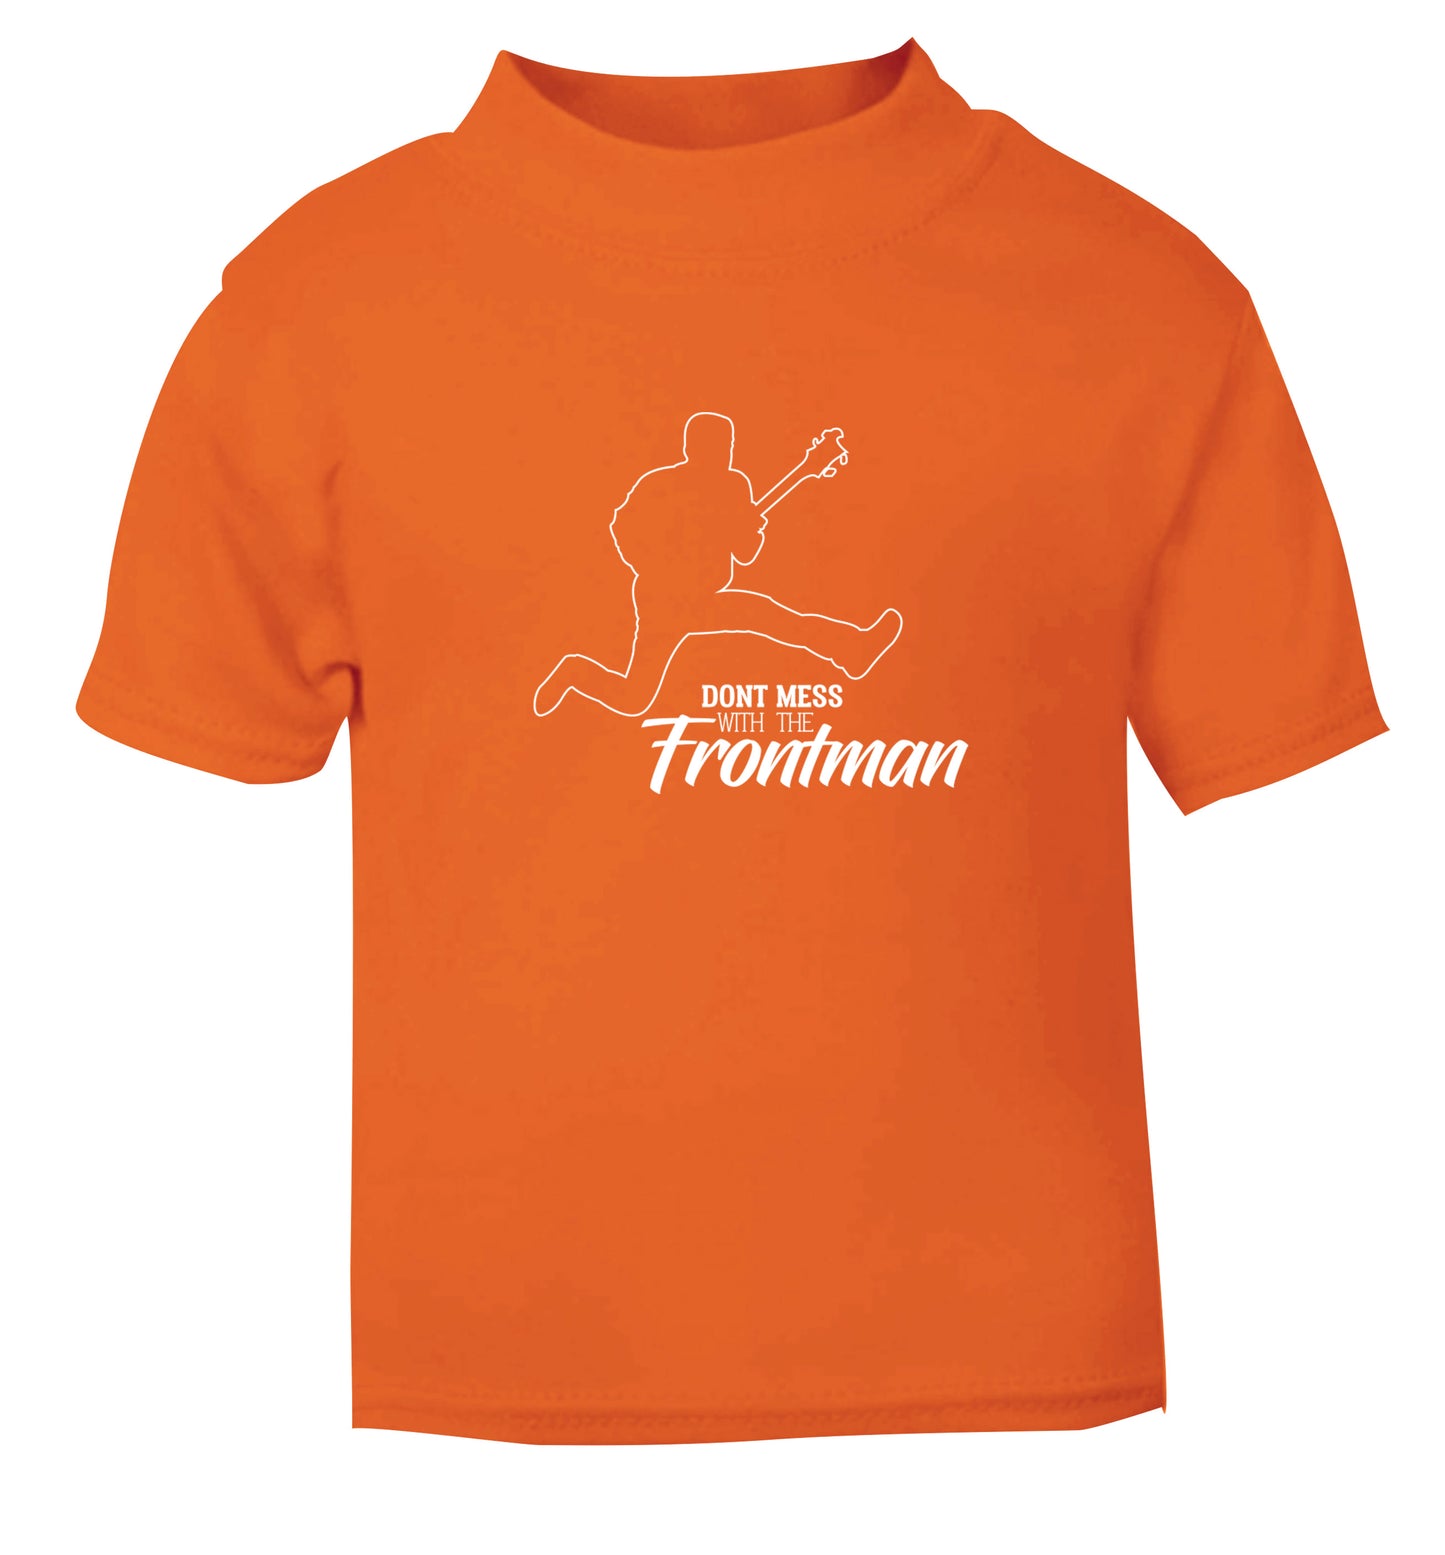 Don't mess with the frontman orange Baby Toddler Tshirt 2 Years